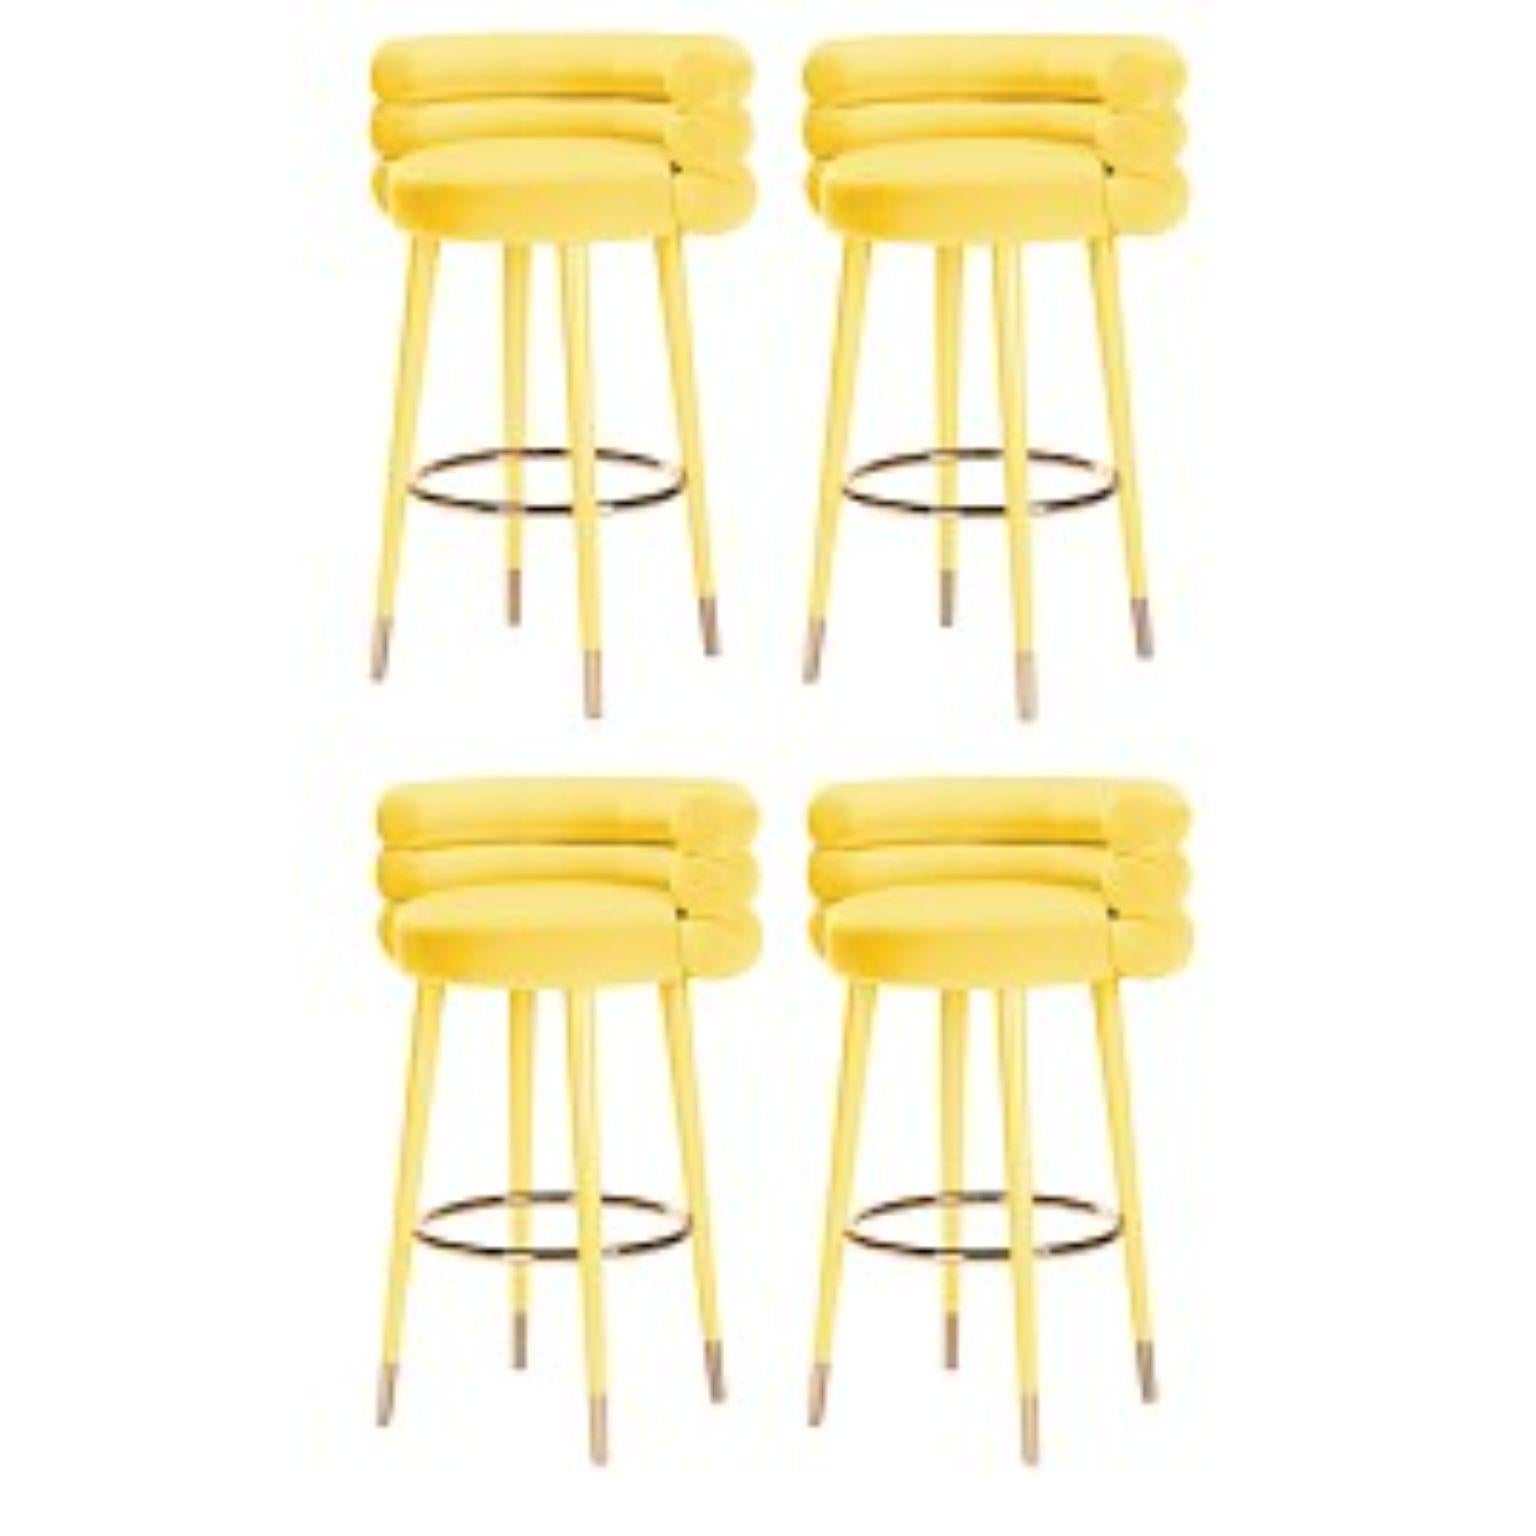 Set of 4 marshmallow bar stools, Royal Stranger
Dimensions: 100 x 70 x 60 cm
Materials: Velvet upholstery, brass
Available in: Mint green, light pink, Royal green, Royal red

Royal stranger is an exclusive furniture brand determined to bring